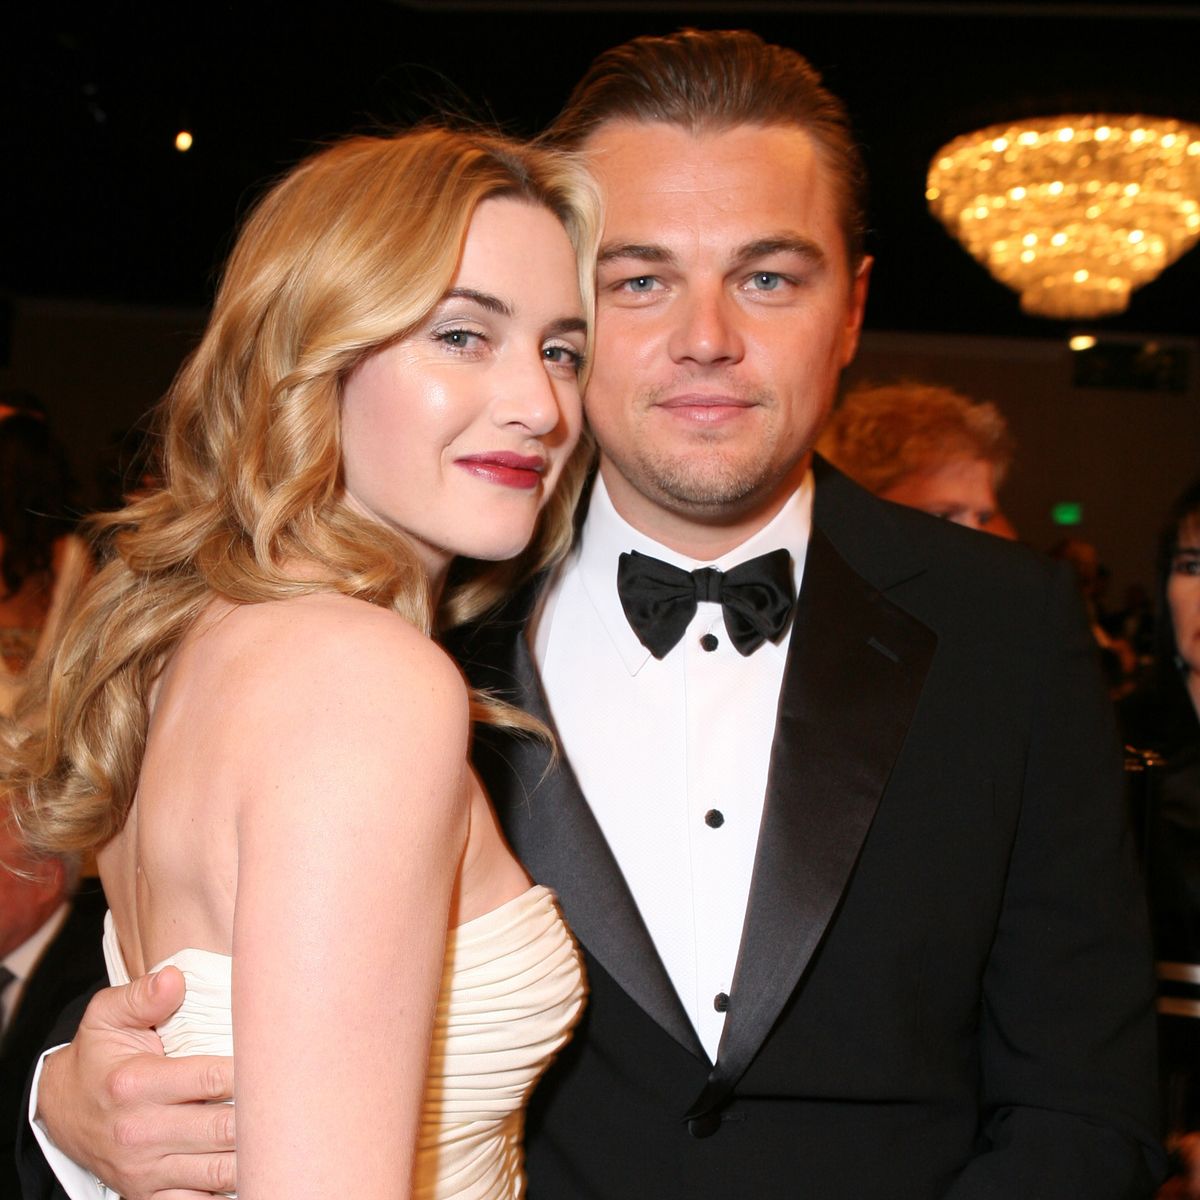 Kate Winslet And Leonardo DiCaprio's Friendship: The British Actor ...